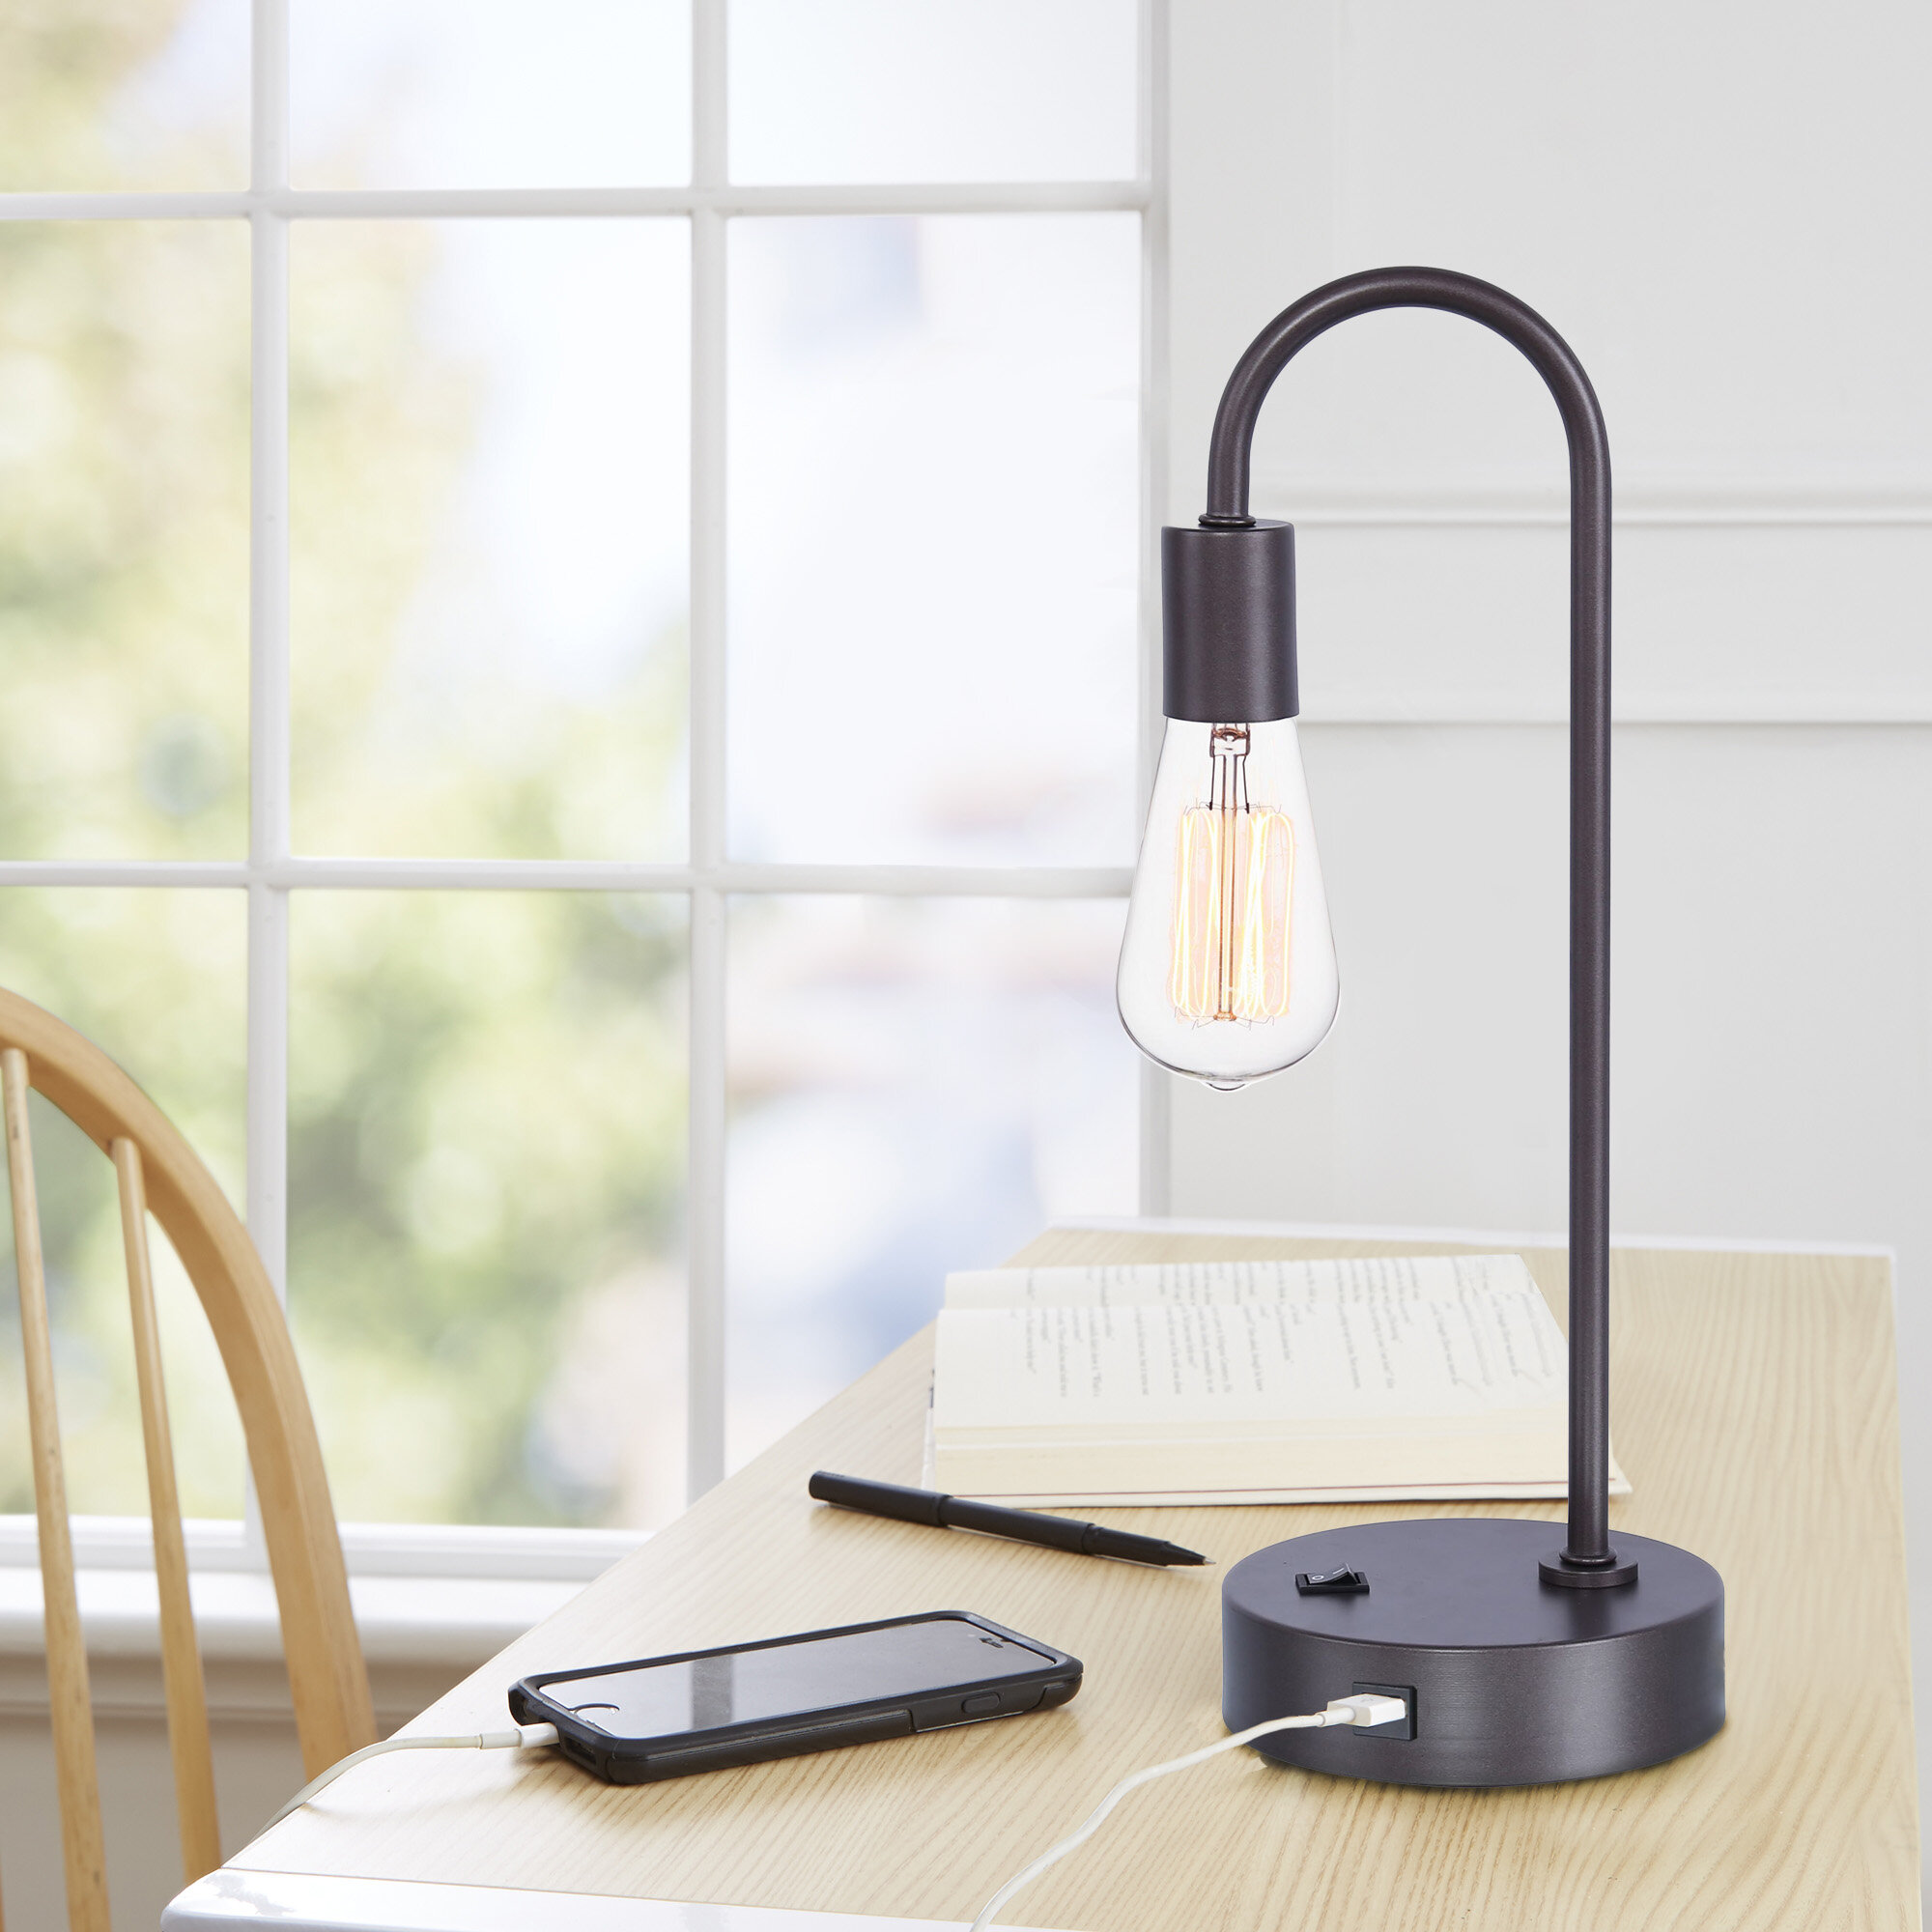 desk lamp with usb port and outlet